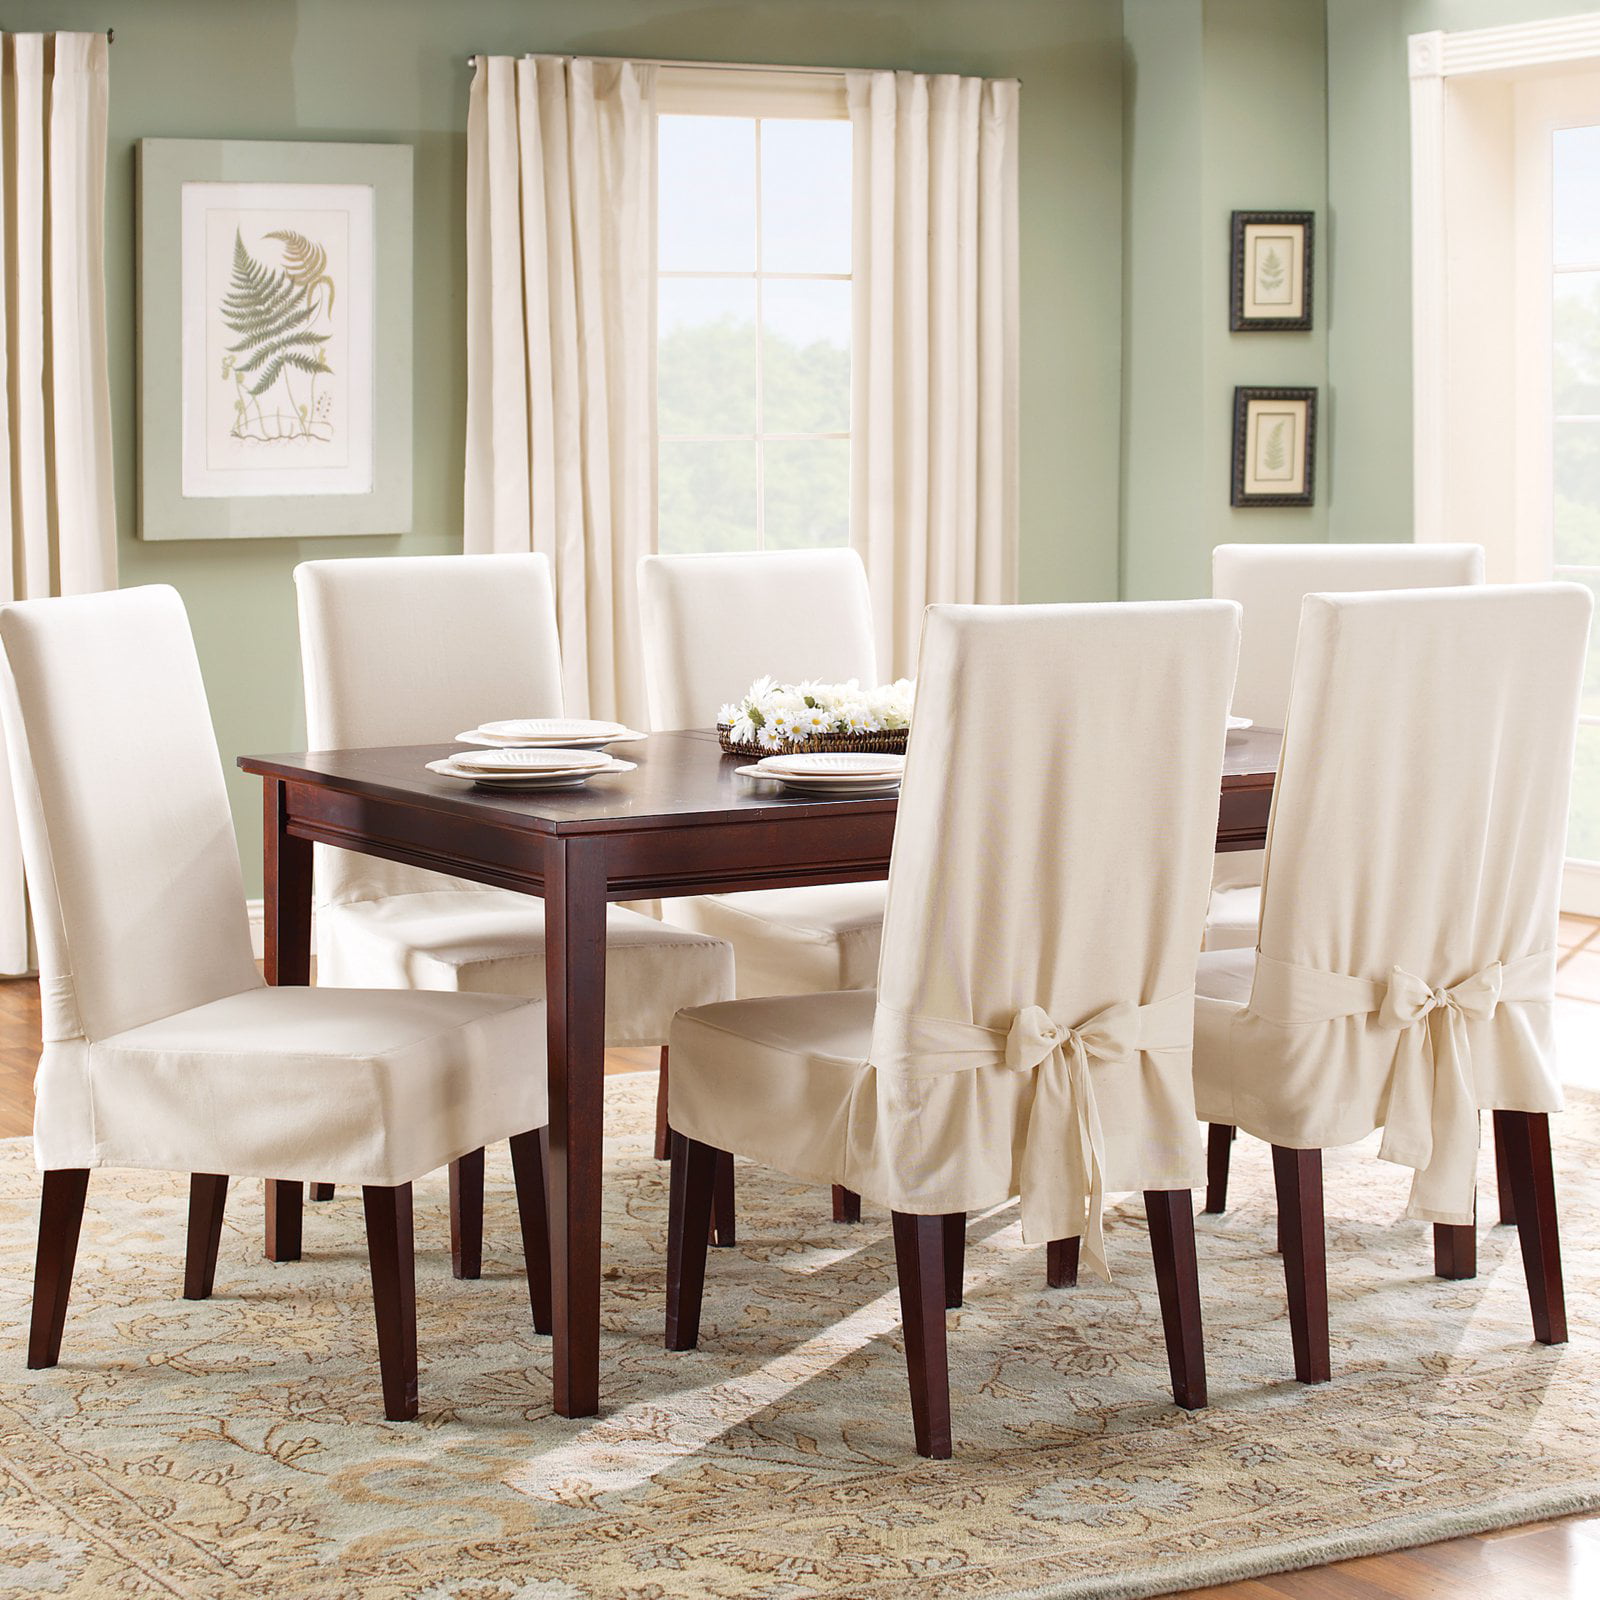 Dining Room Chair Cover, Dining Room Chair With Arms Slipcovers